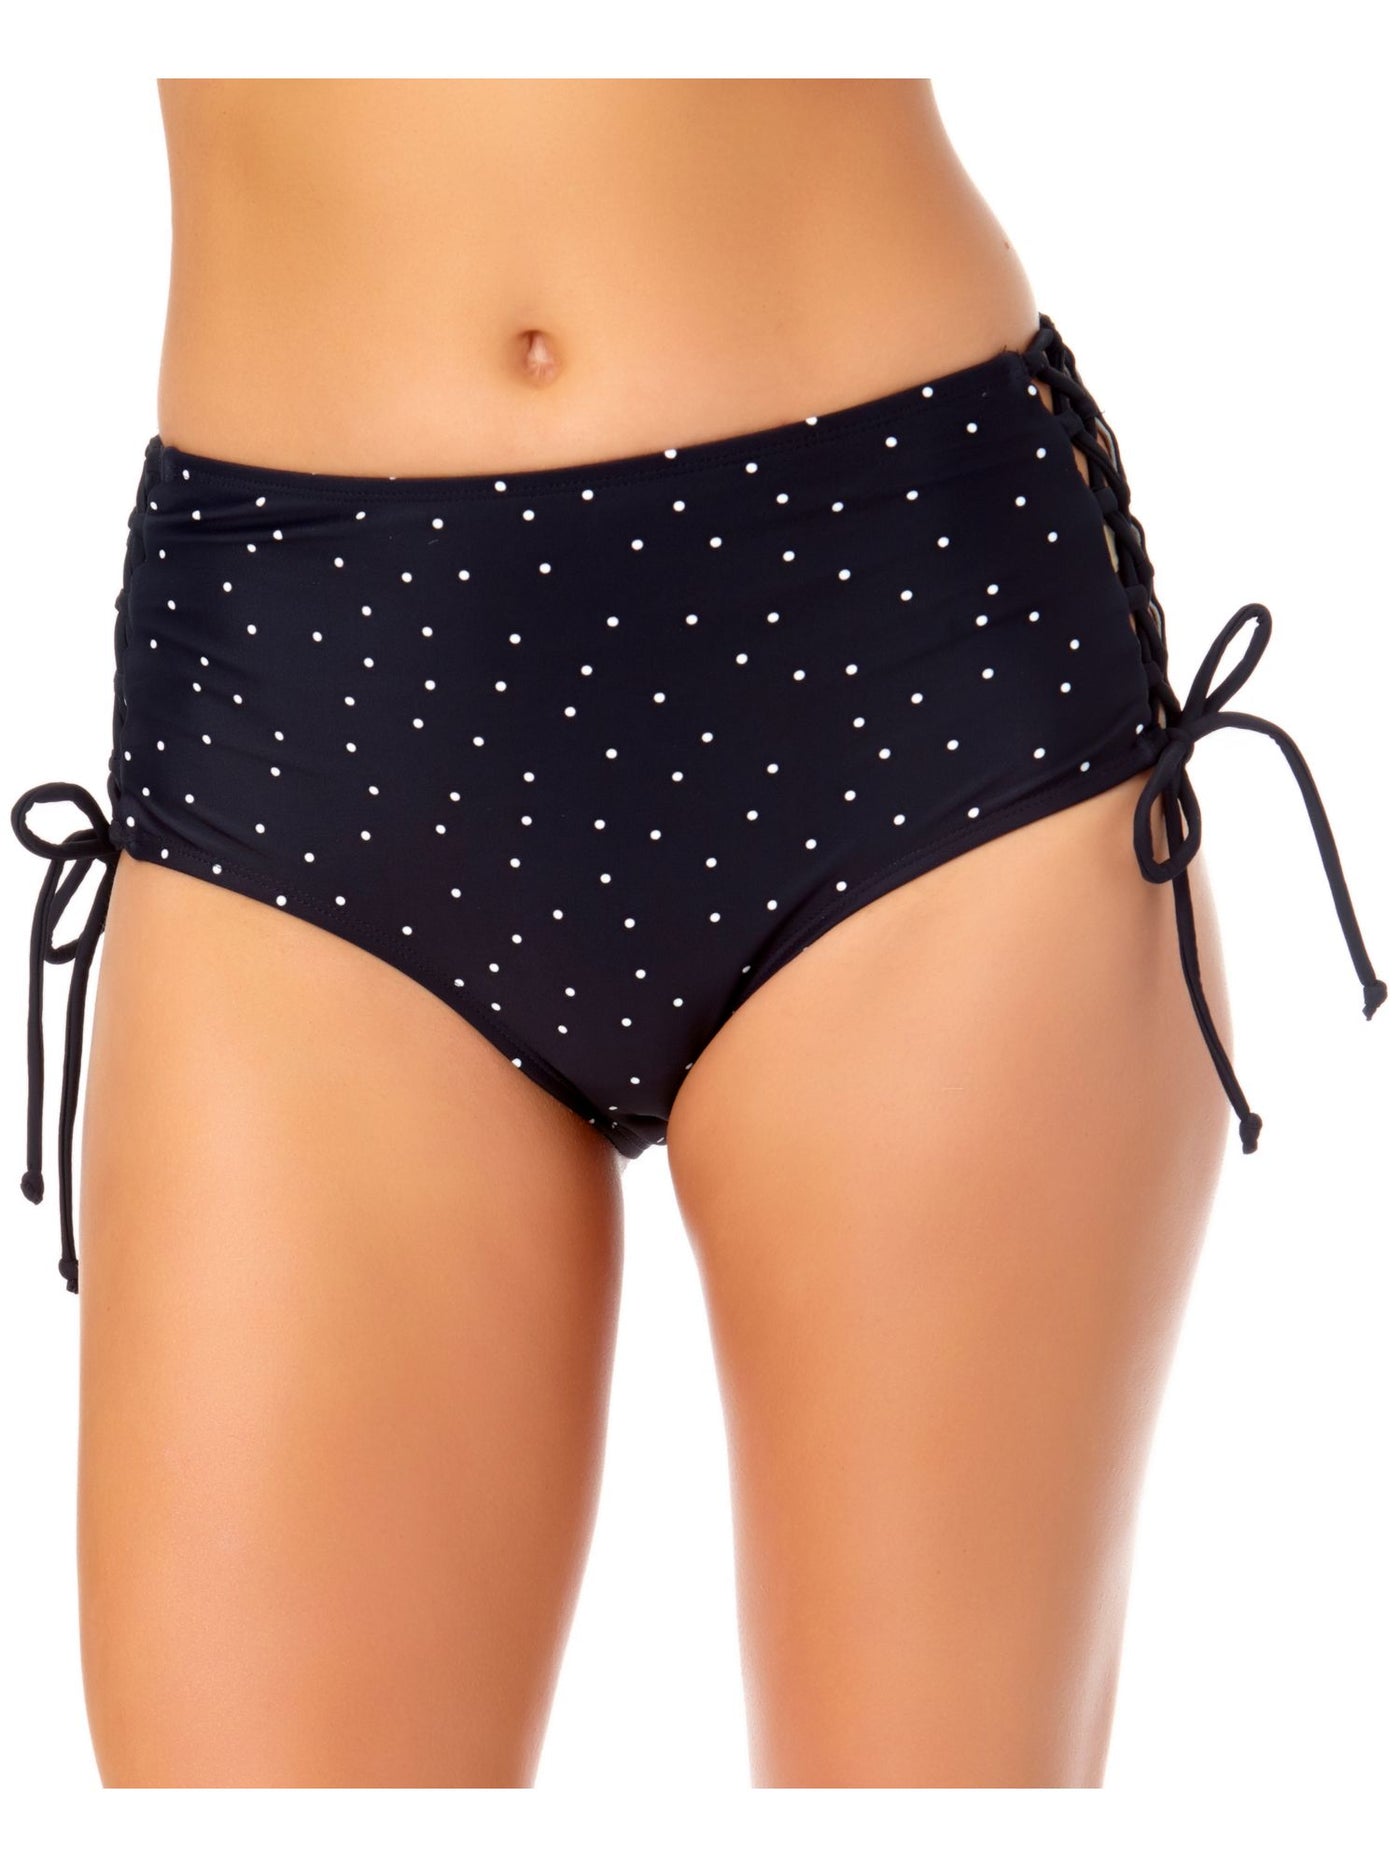 CALIFORNIA WAVES Women's Black Polka Dot Stretch Lace-Up Lined Bikini Moderate Coverage Tie High Waisted Swimsuit Bottom S